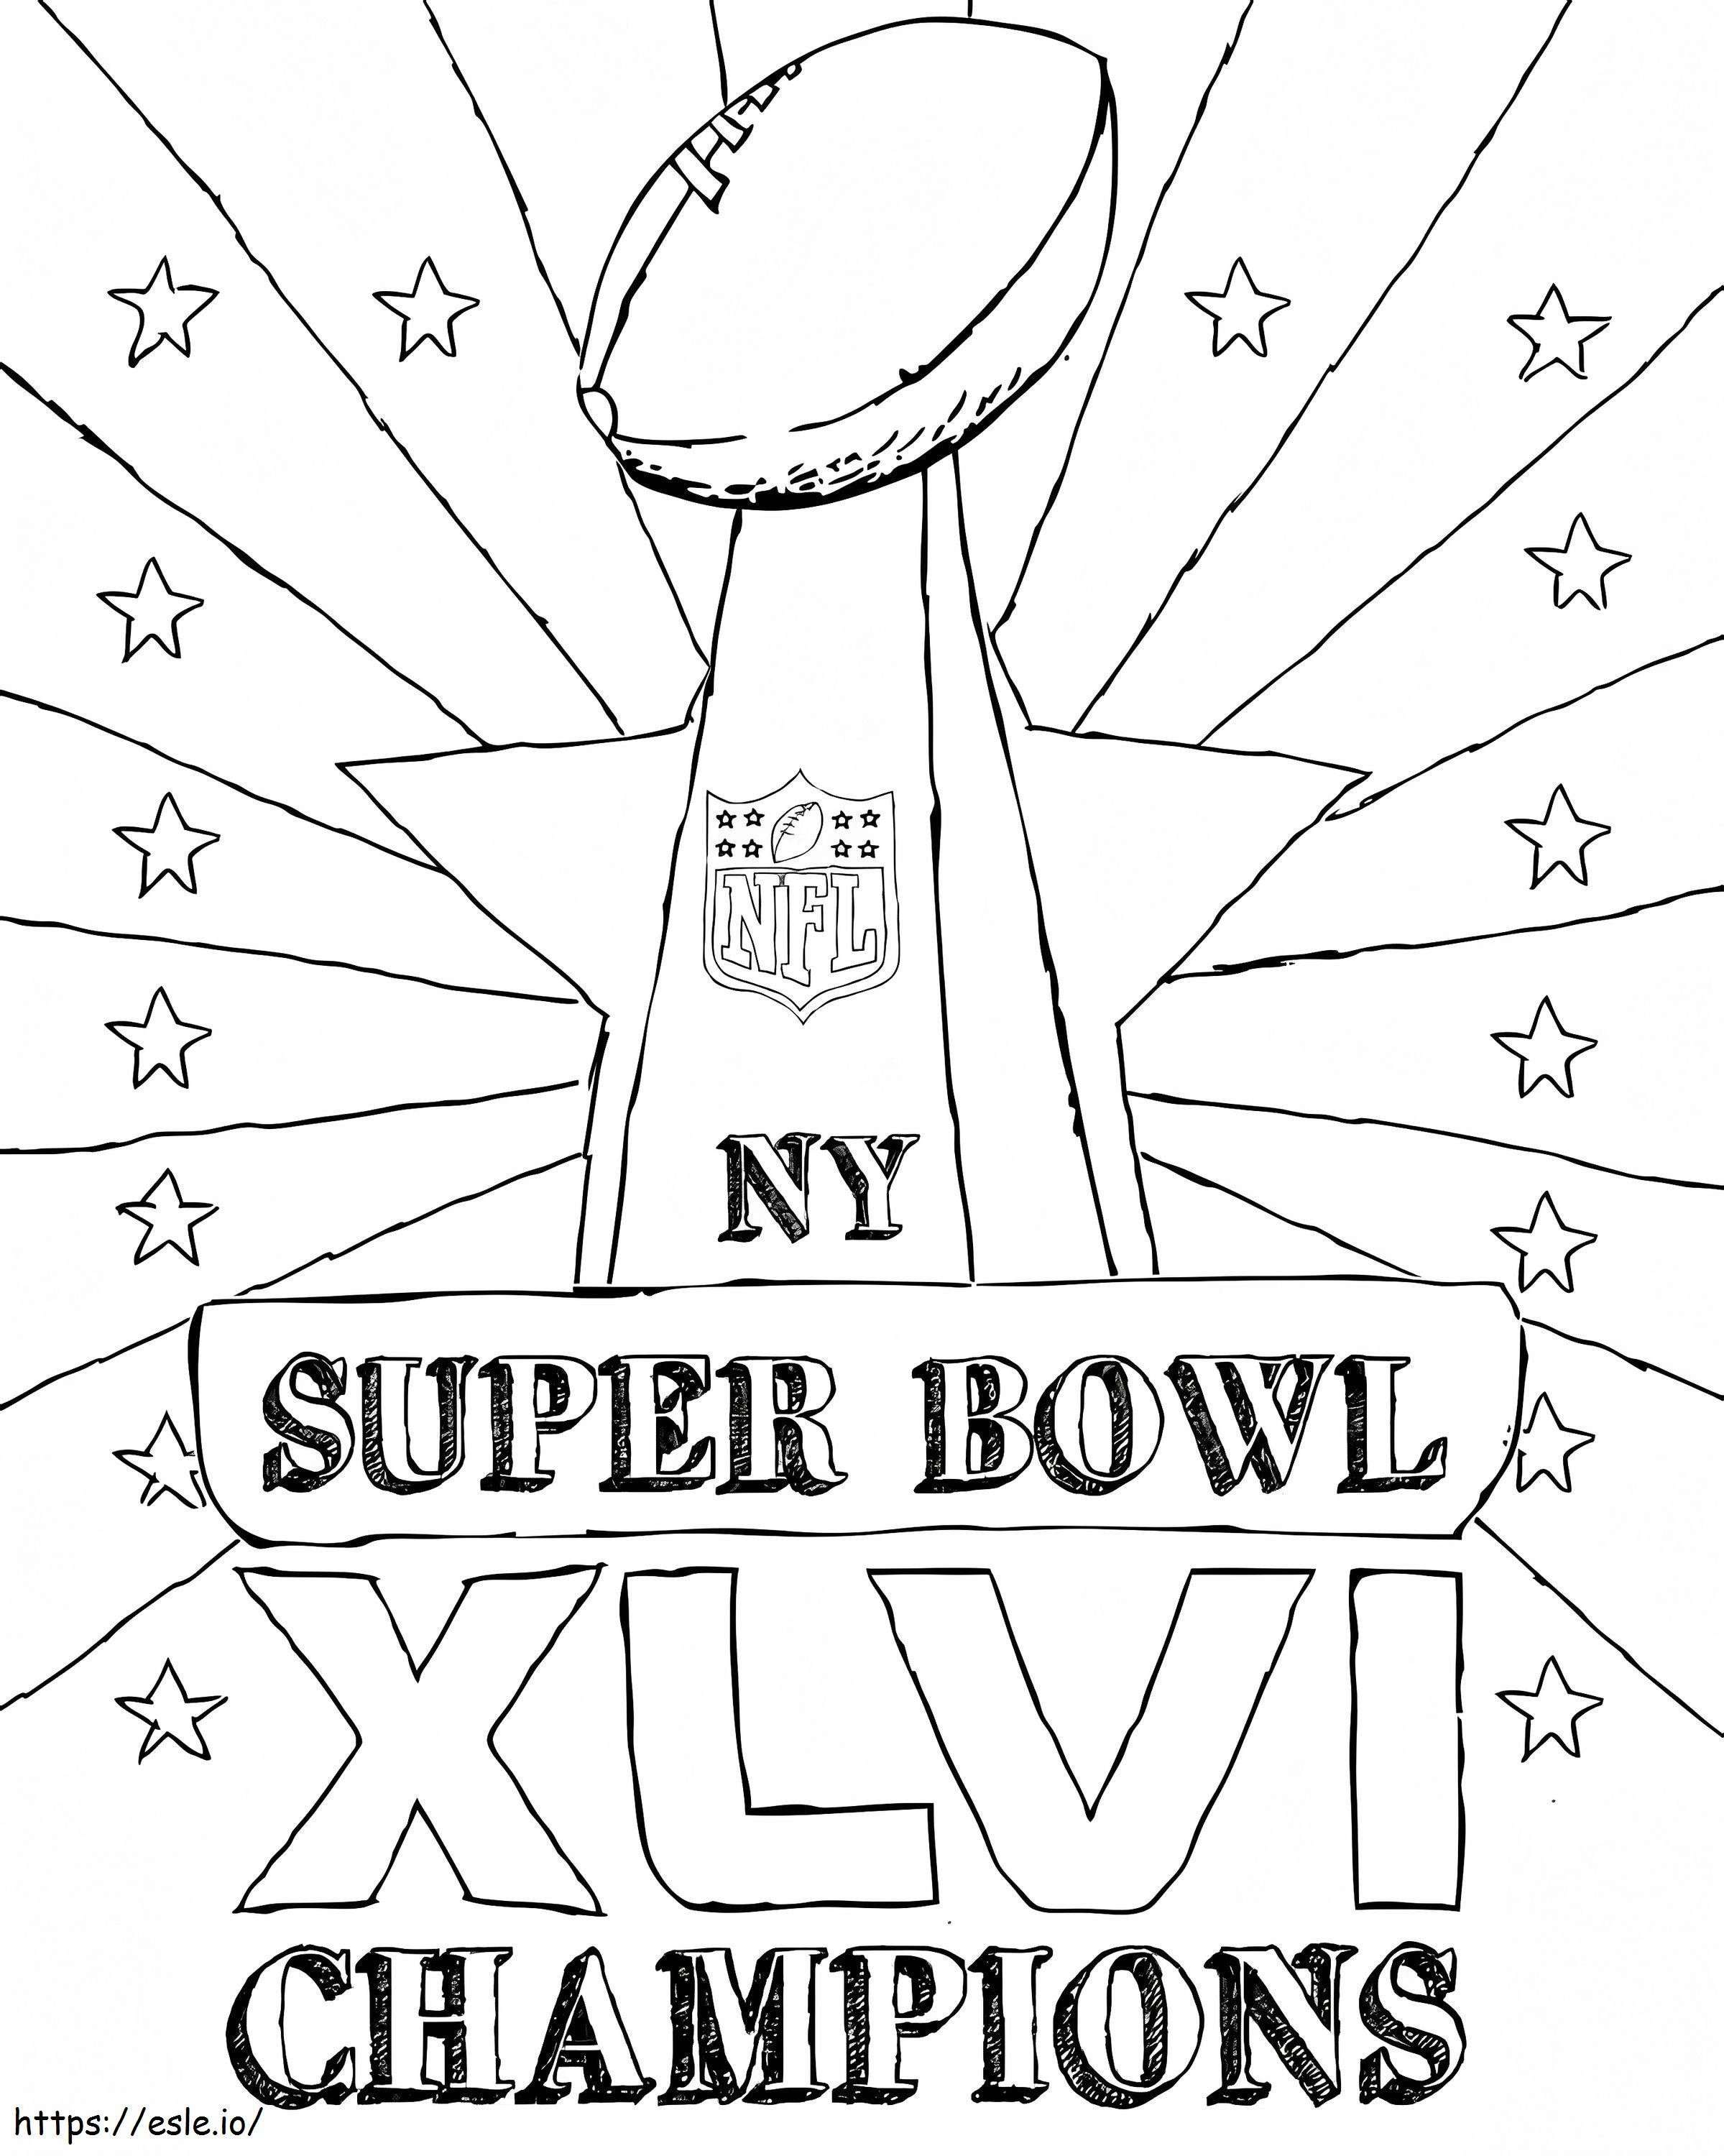 Super Bowl Trophy Coloring Page coloring page